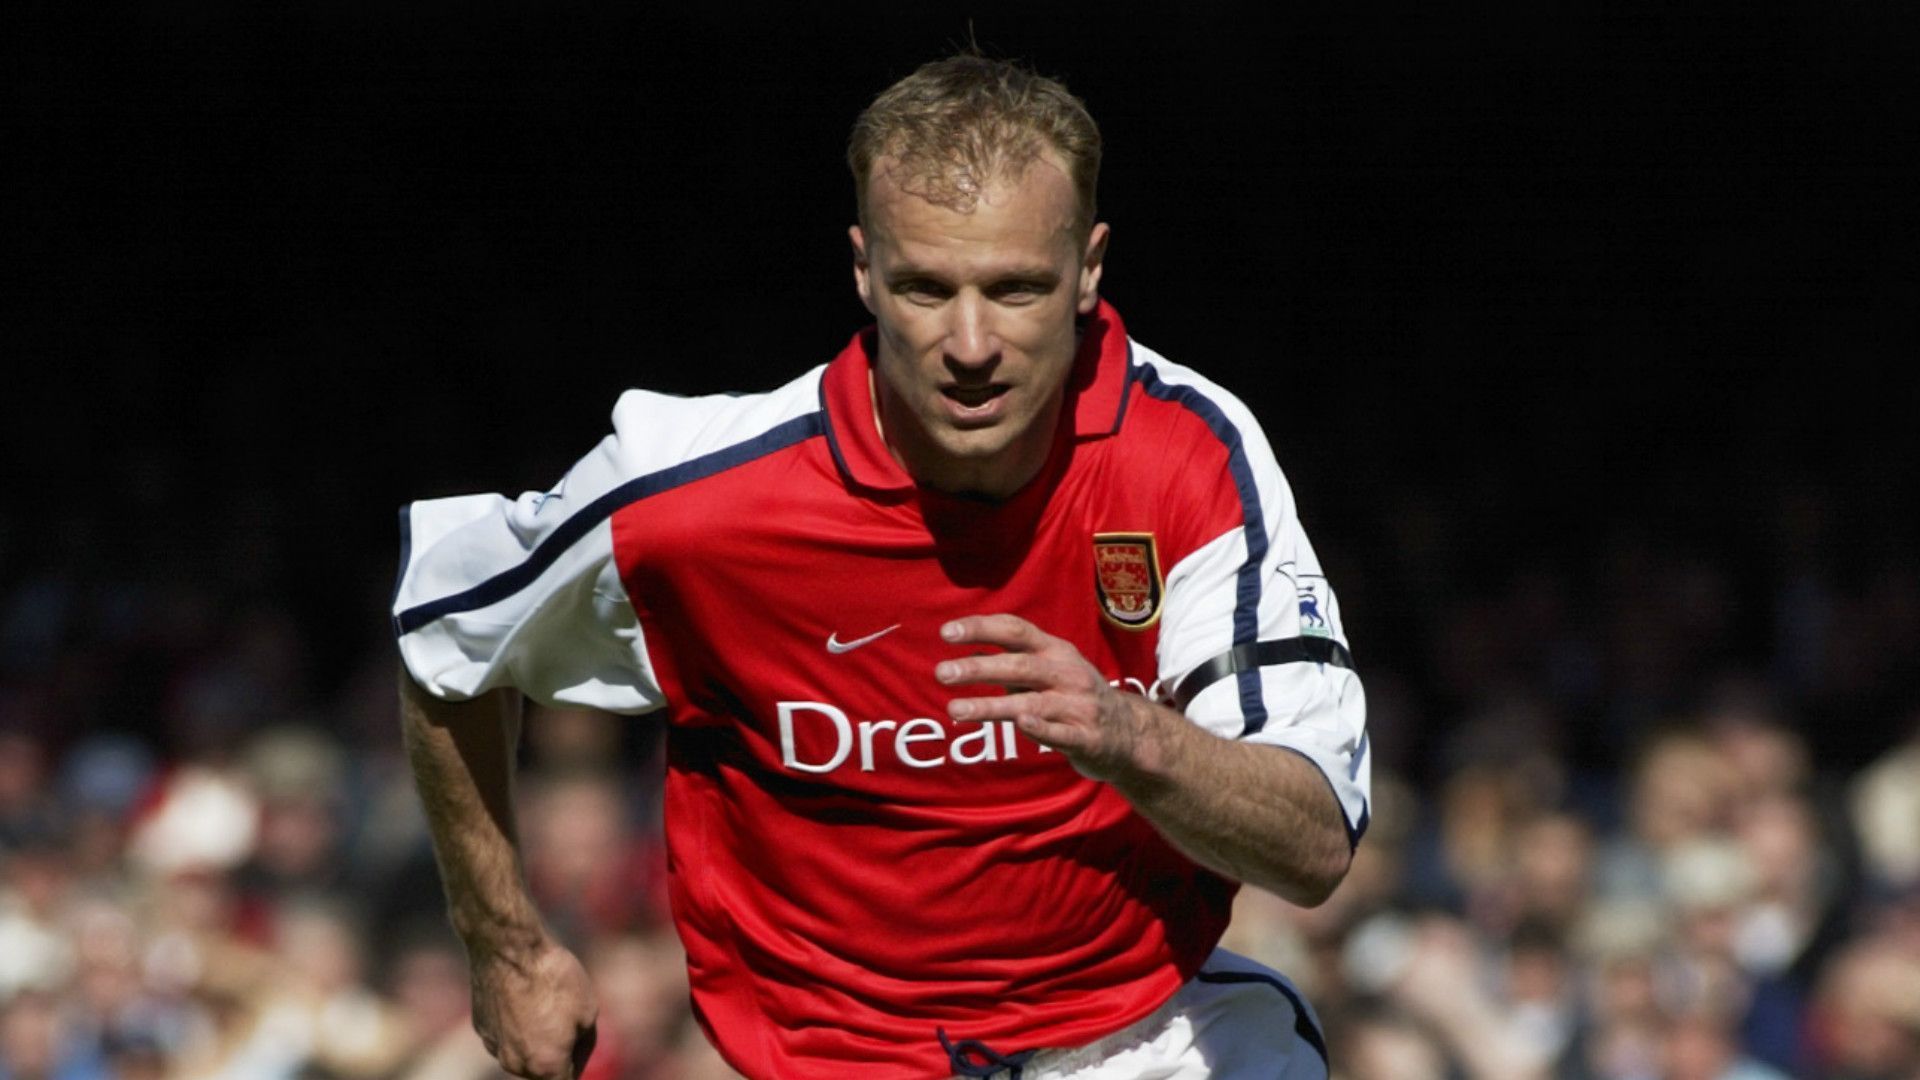 Dennis Bergkamp was a huge force to be reckoned with during his days with Arsenal.